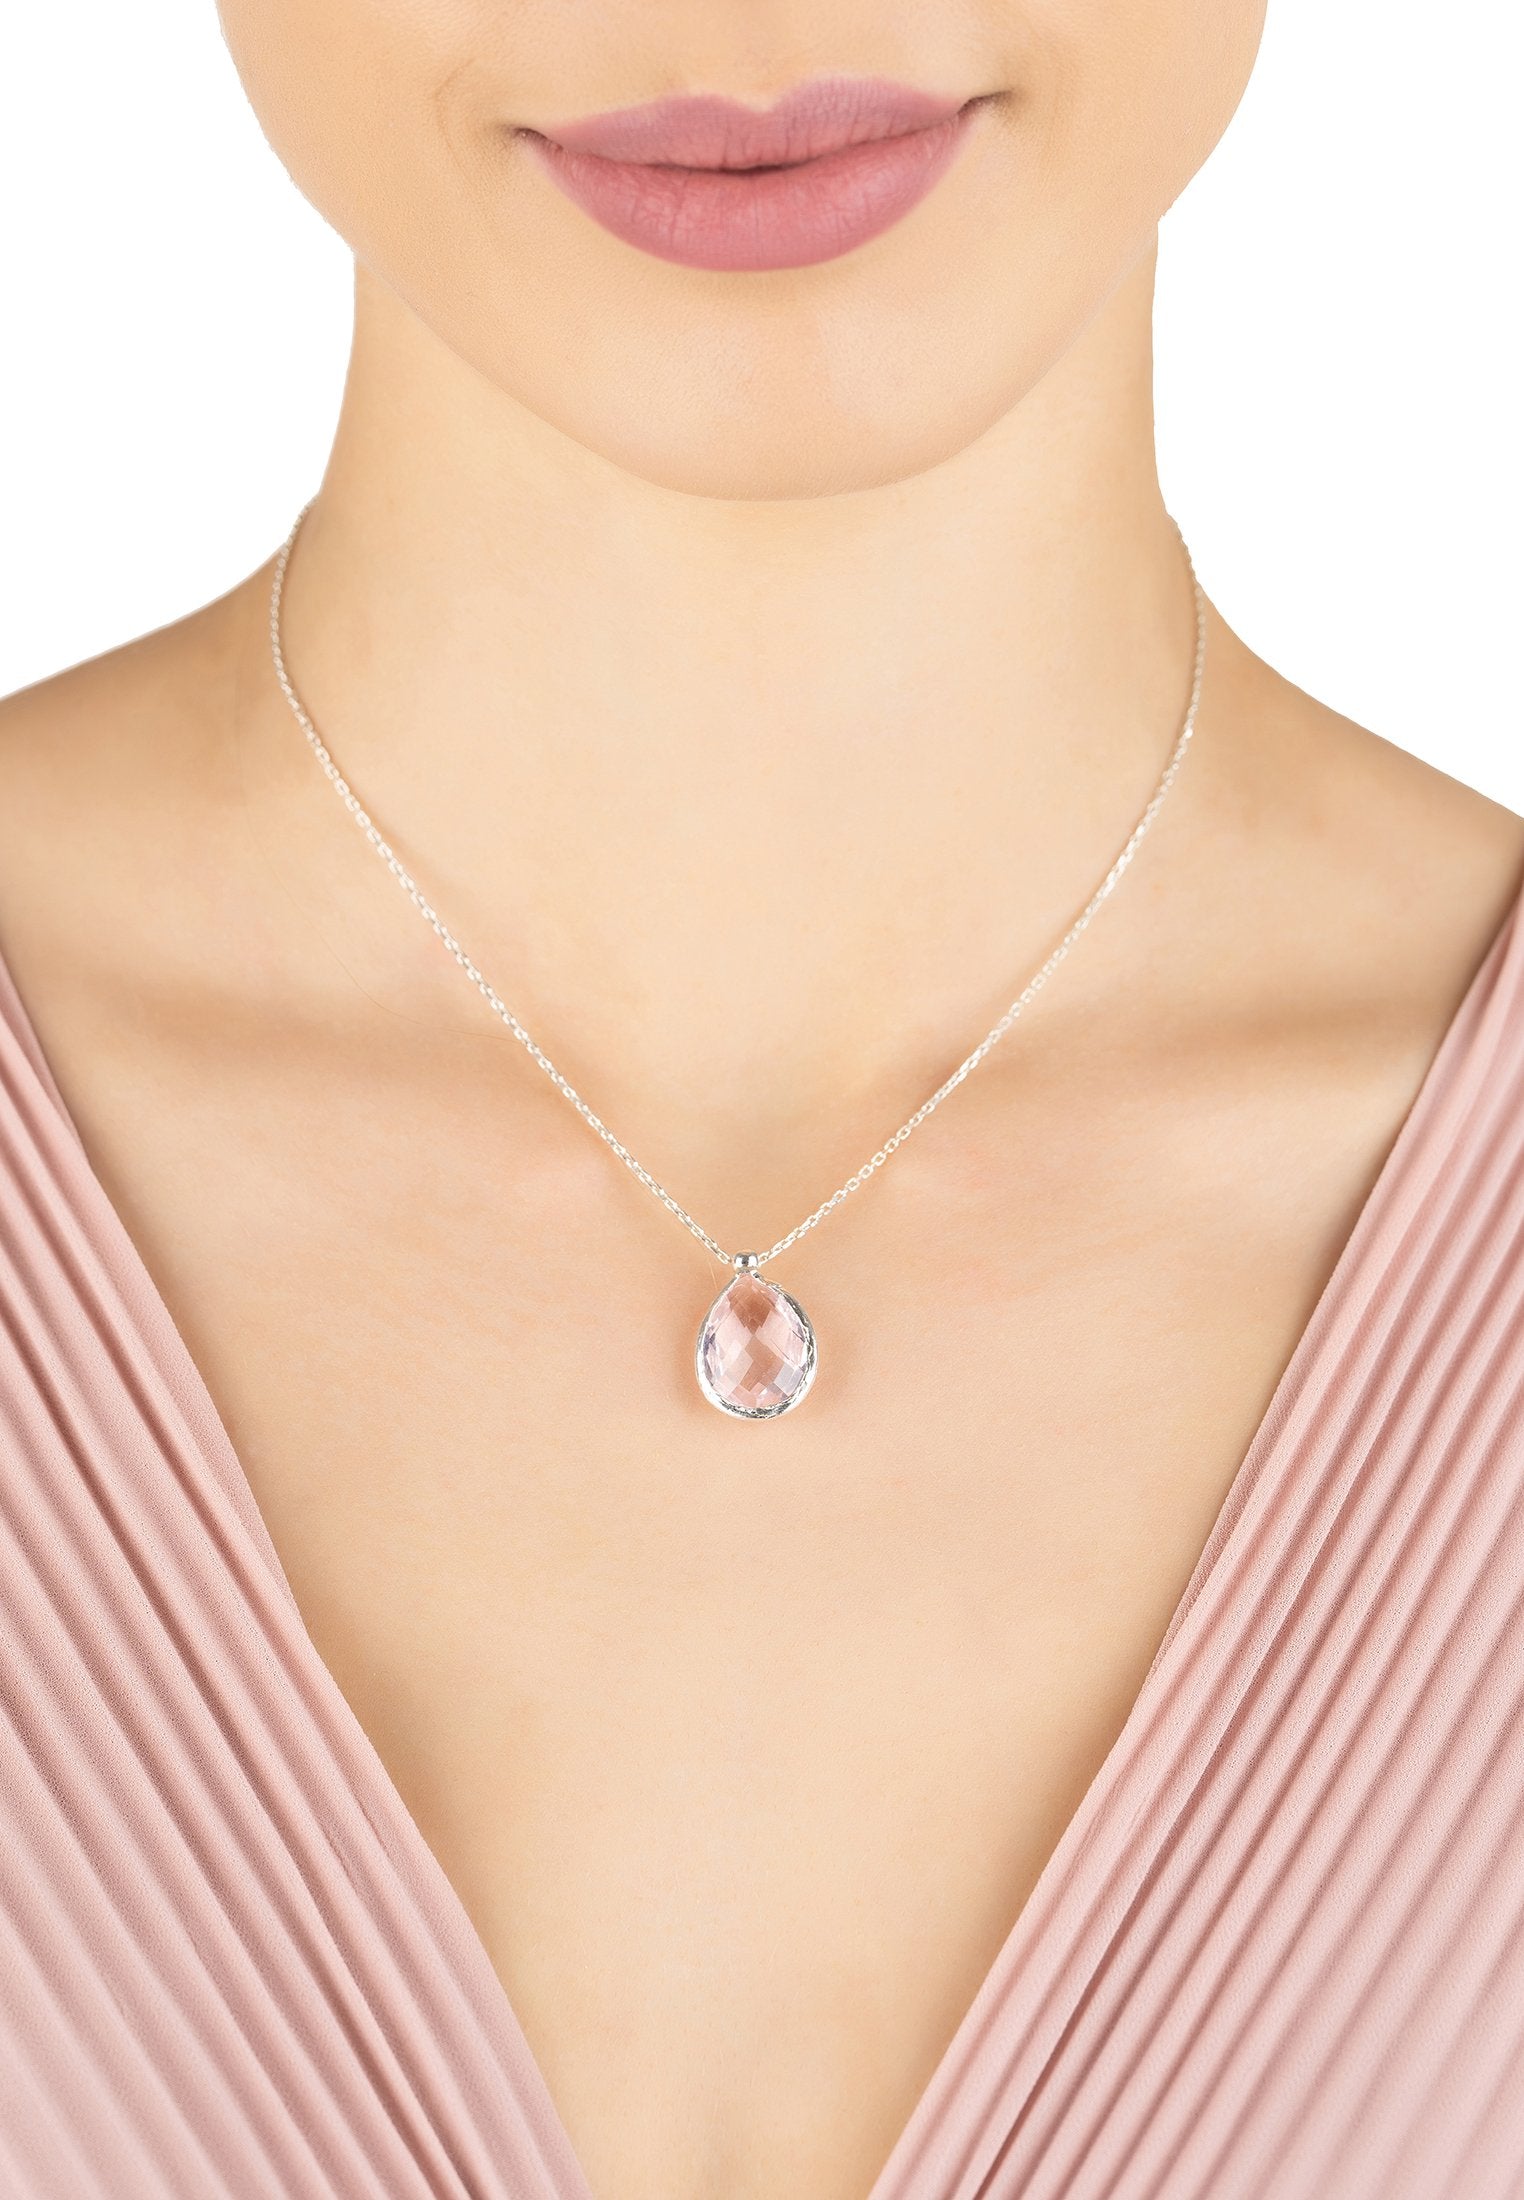 Petite Rose Quartz Drop Necklace in Sterling Silver: Ideal Gift for Birthdays and Bridesmaids - Jewelry & Watches - Bijou Her -  -  - 